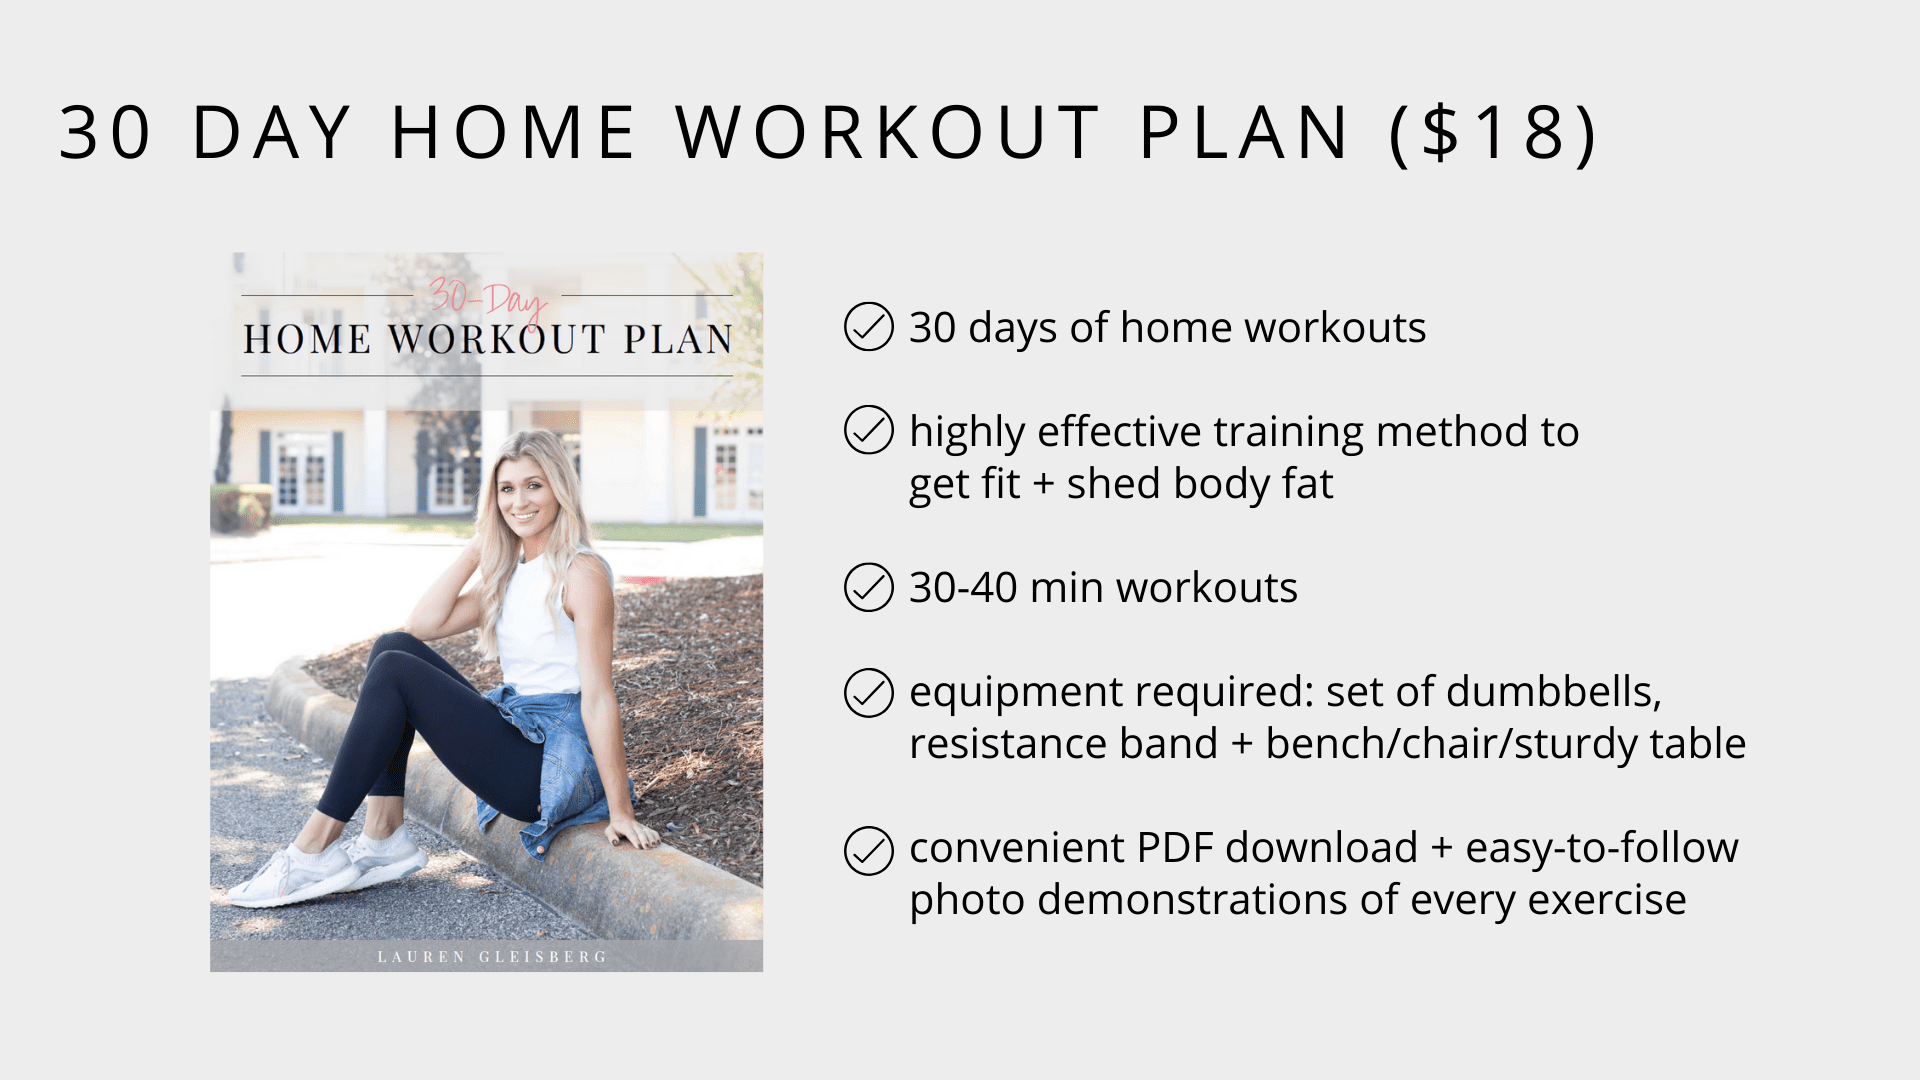 30-Day Home Workout Plan For Women